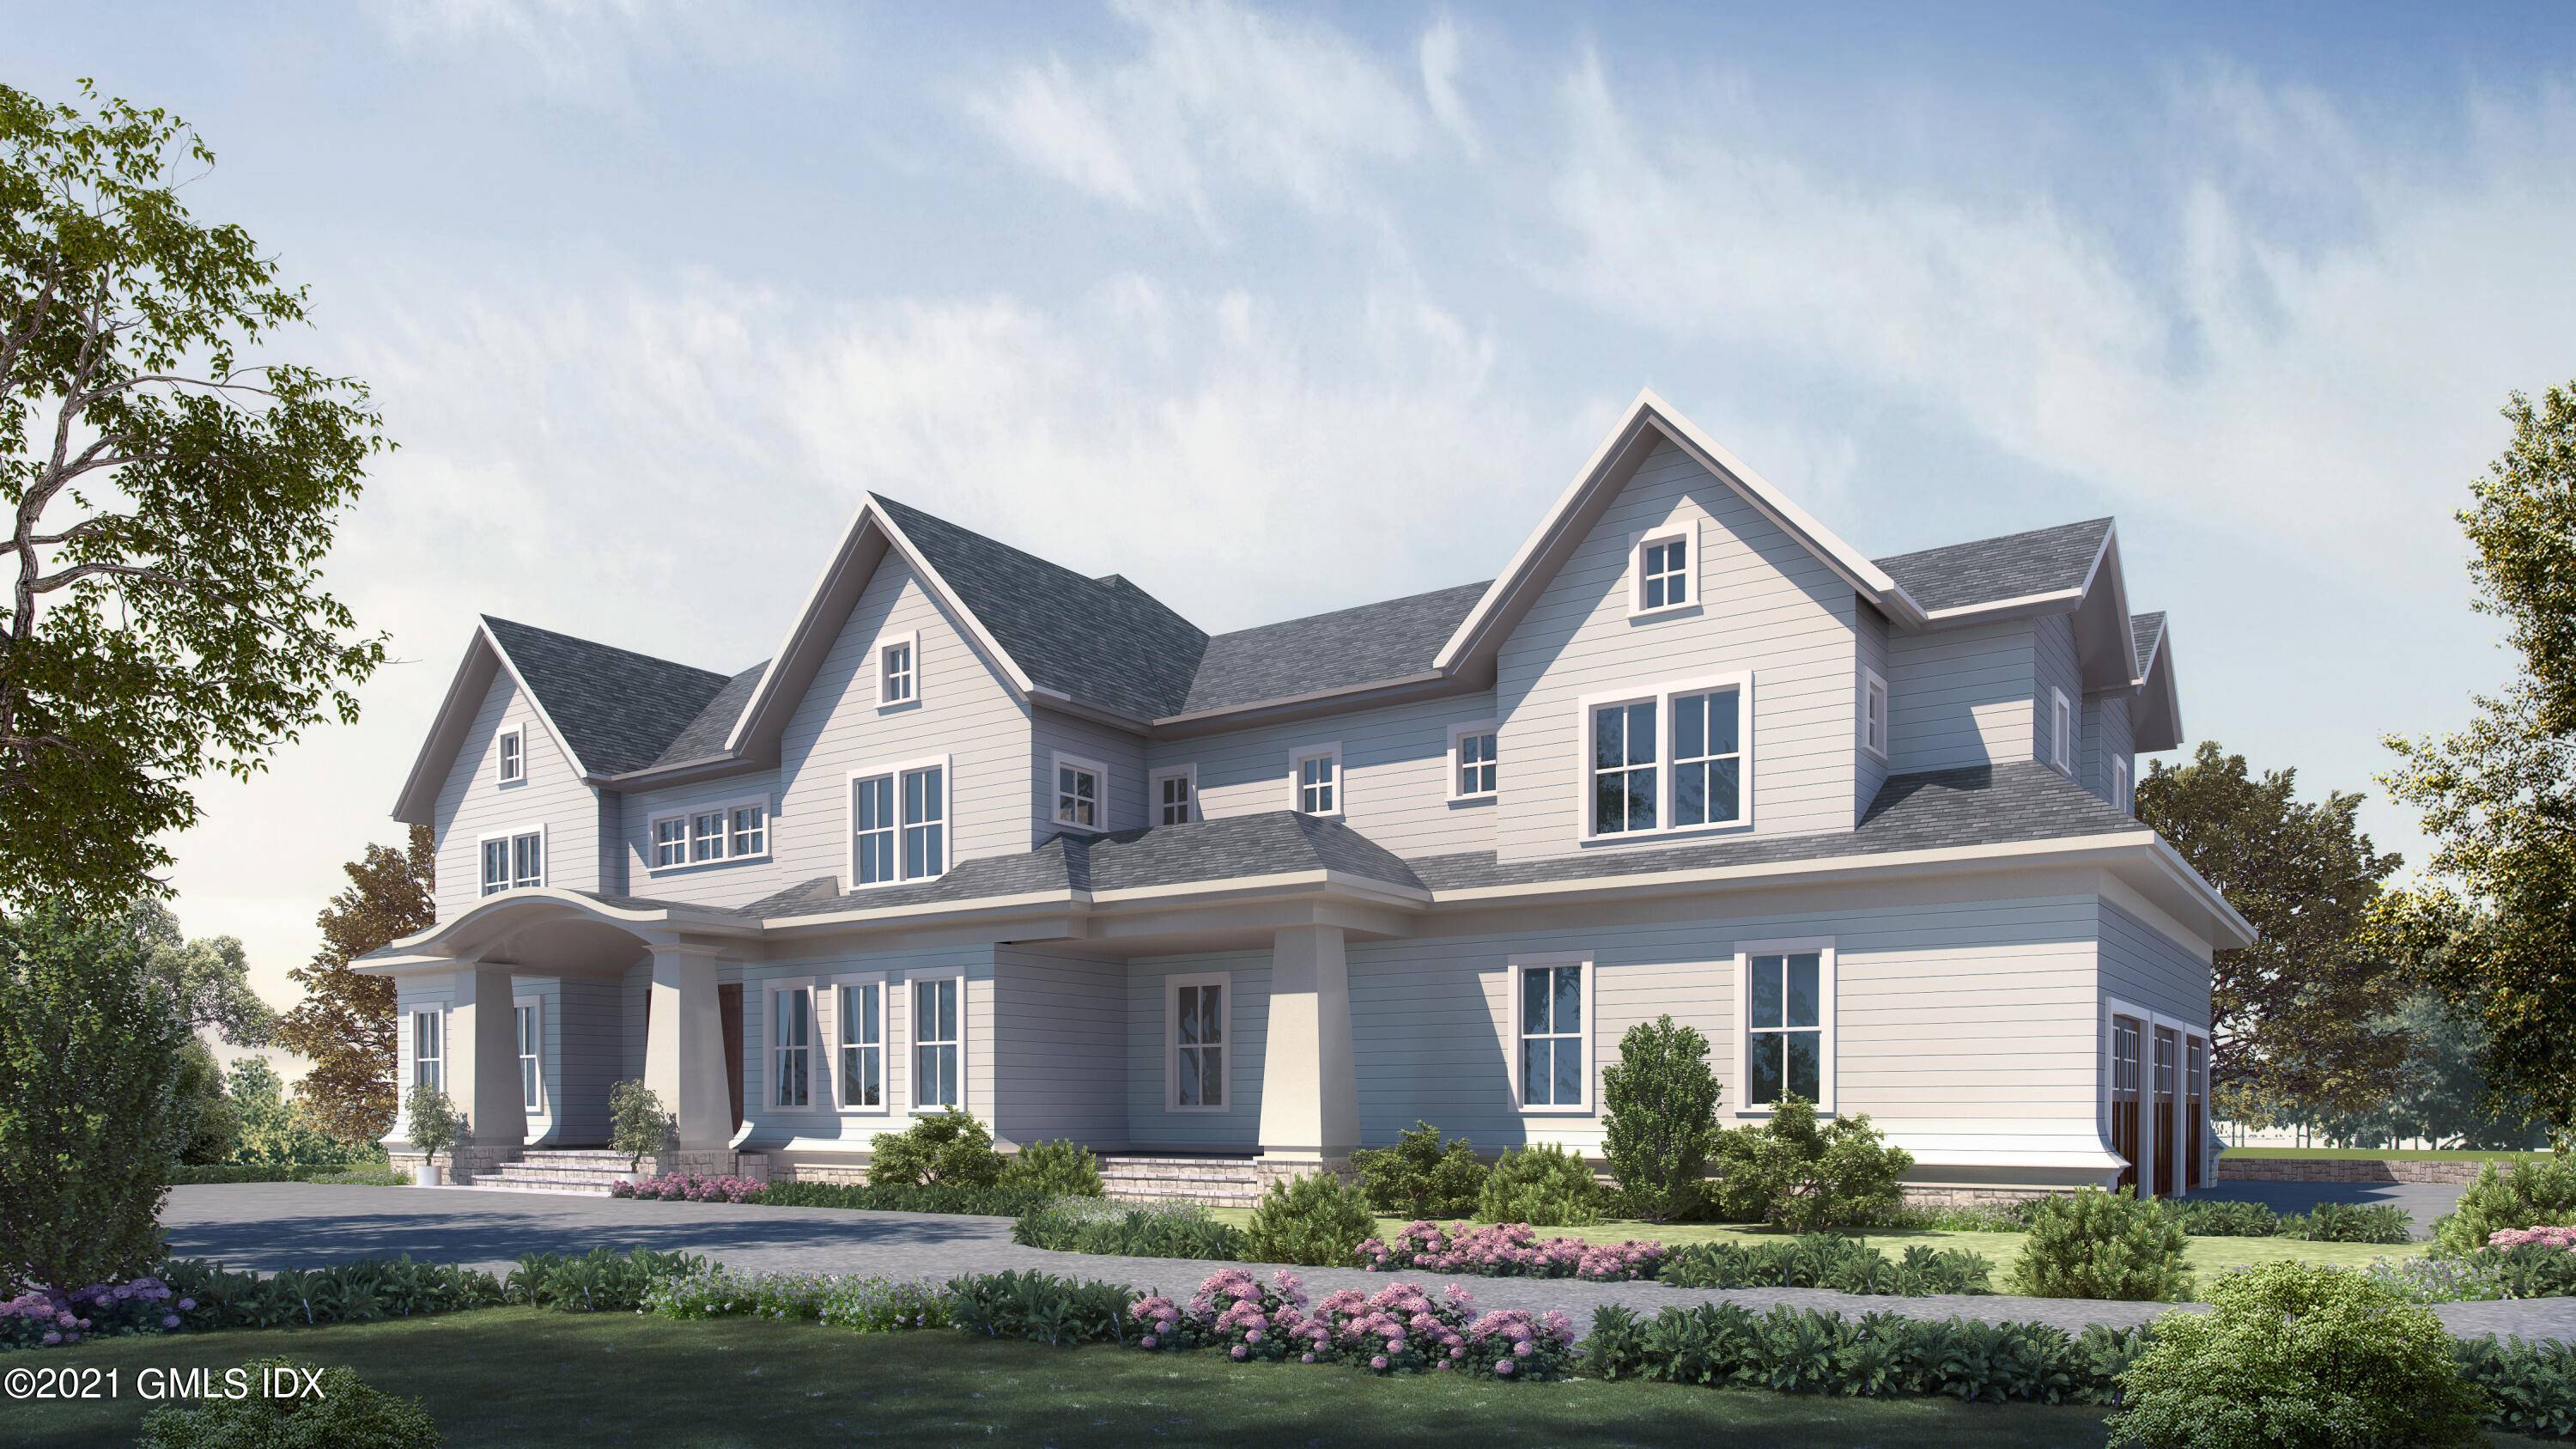 THE OAKS Introducing the newest gated community in mid country Greenwich, offering an elevated level of living.